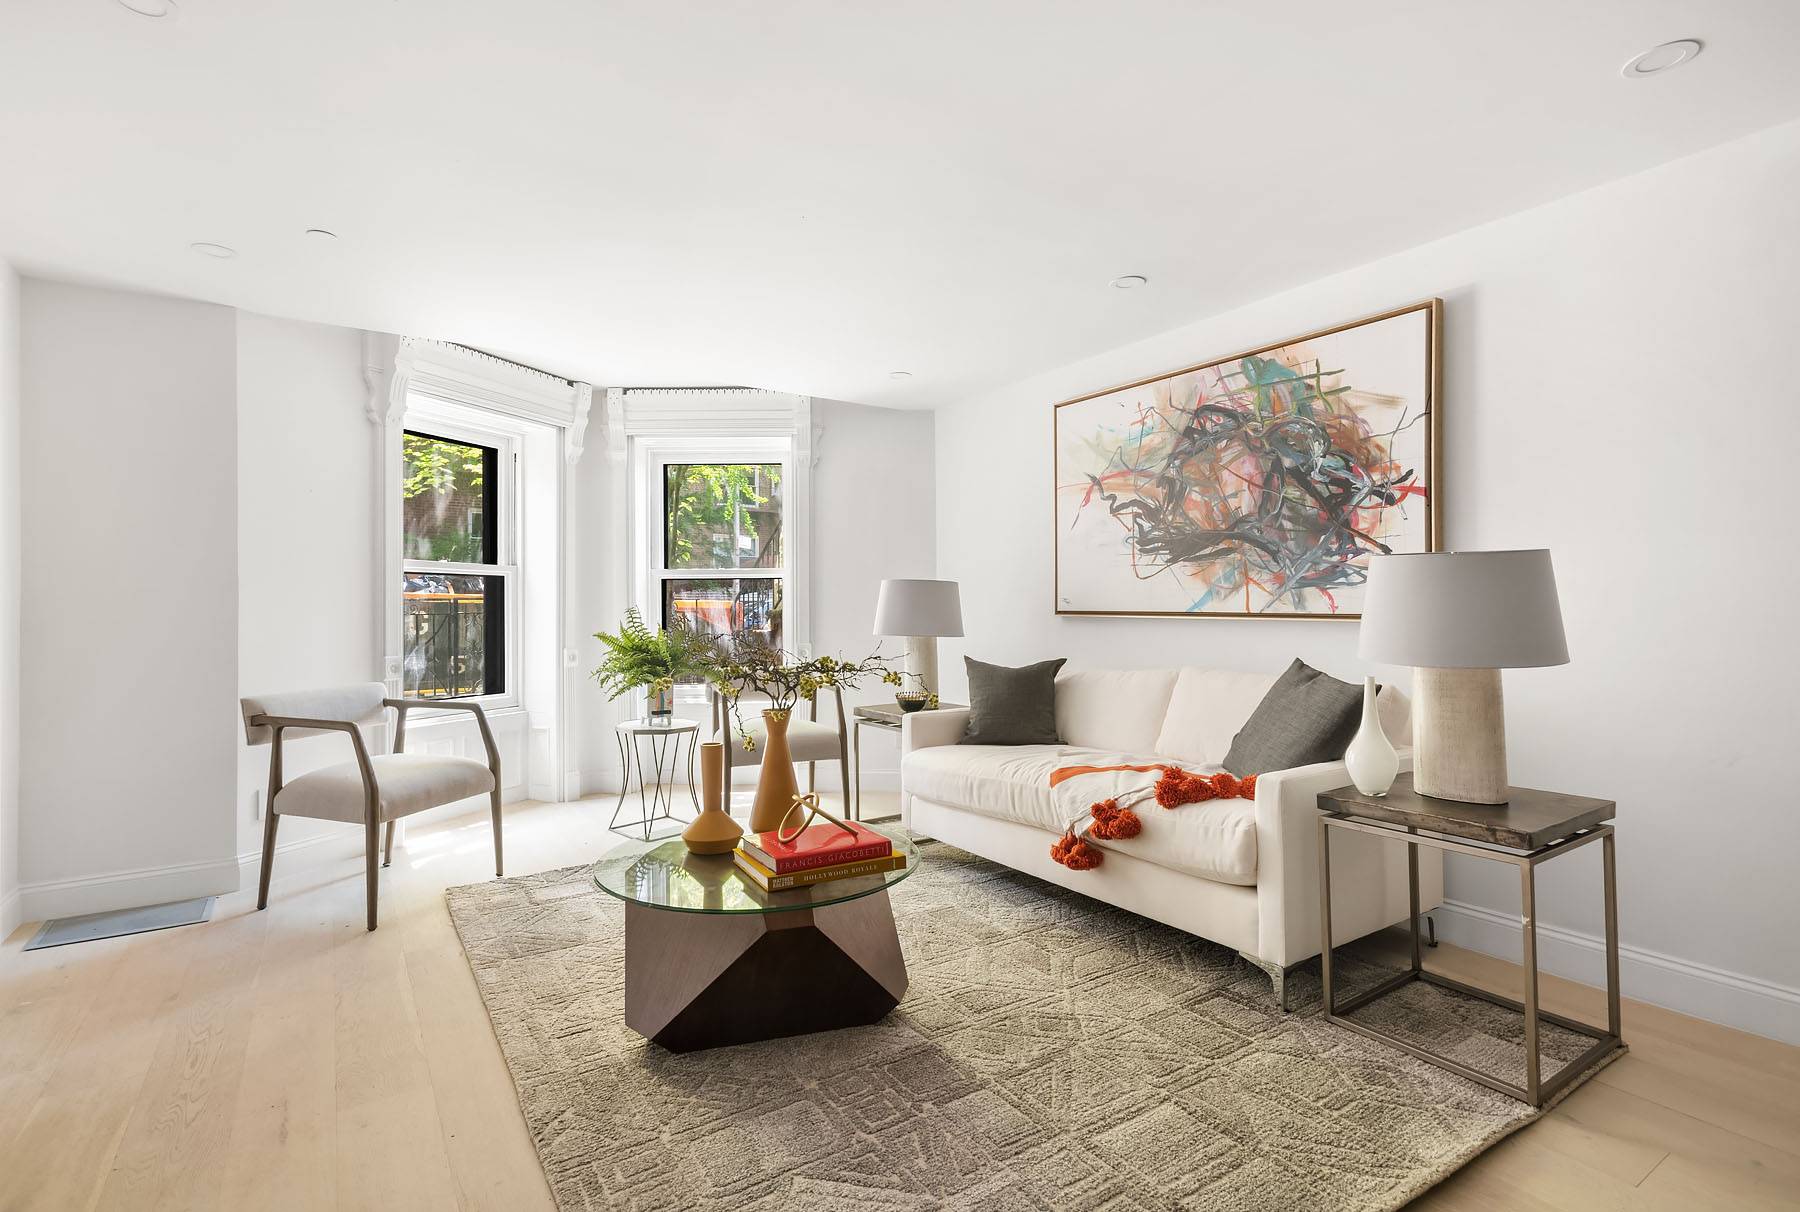 Introducing 227 Berkeley Place, a distinct collection of four newly completed luxury condominium residences located on one of Park Slope s most highly desired tree lined blocks, a mere half ...